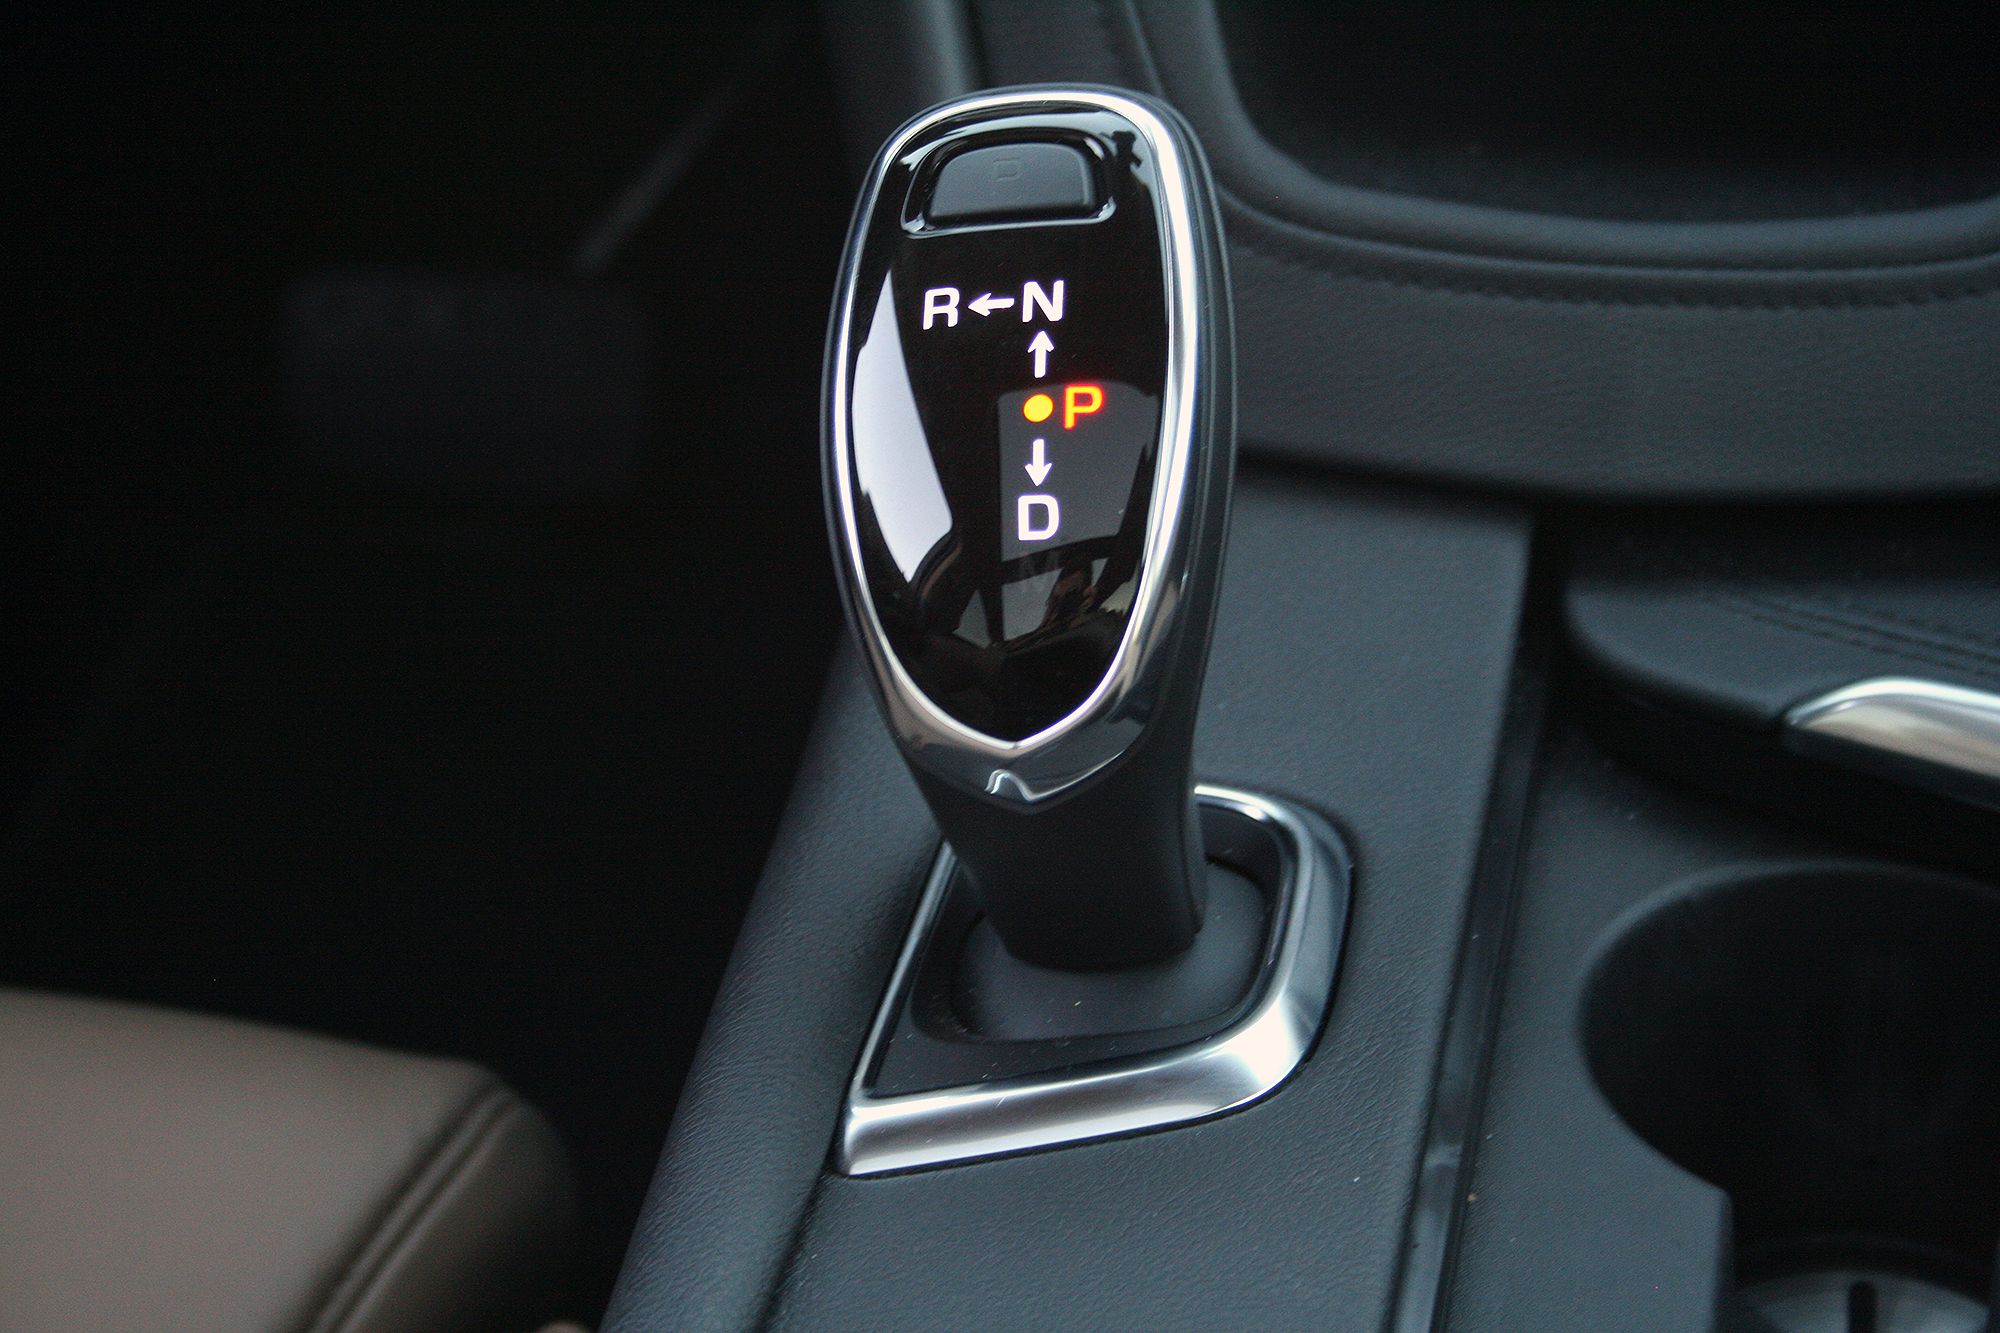 Eight-speed automatic transmission